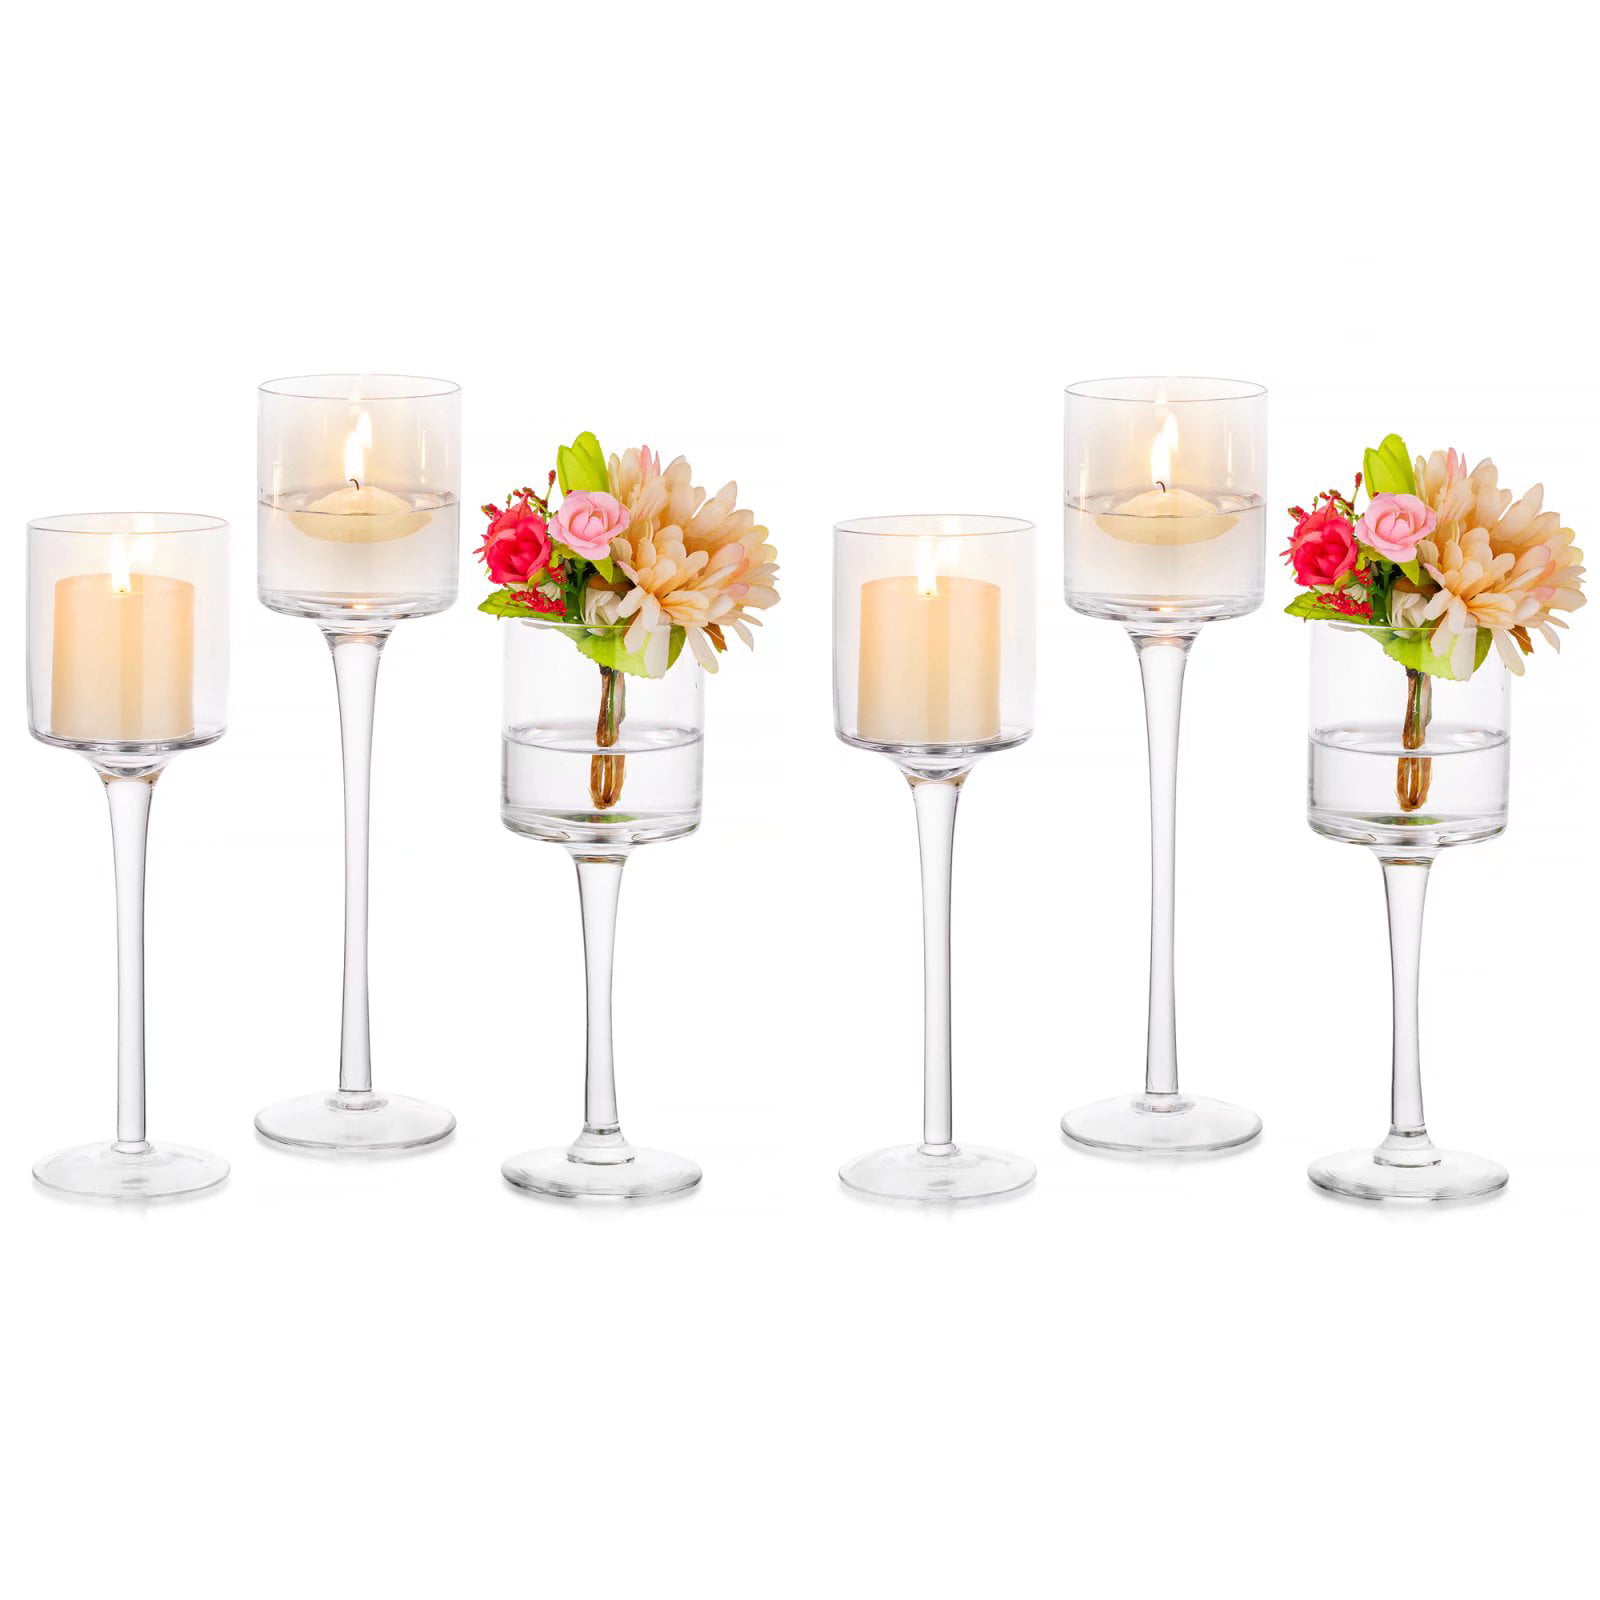 50 White Wax Clear Glass Votive Table Candle Wedding Anniversary Party Event 6cm 